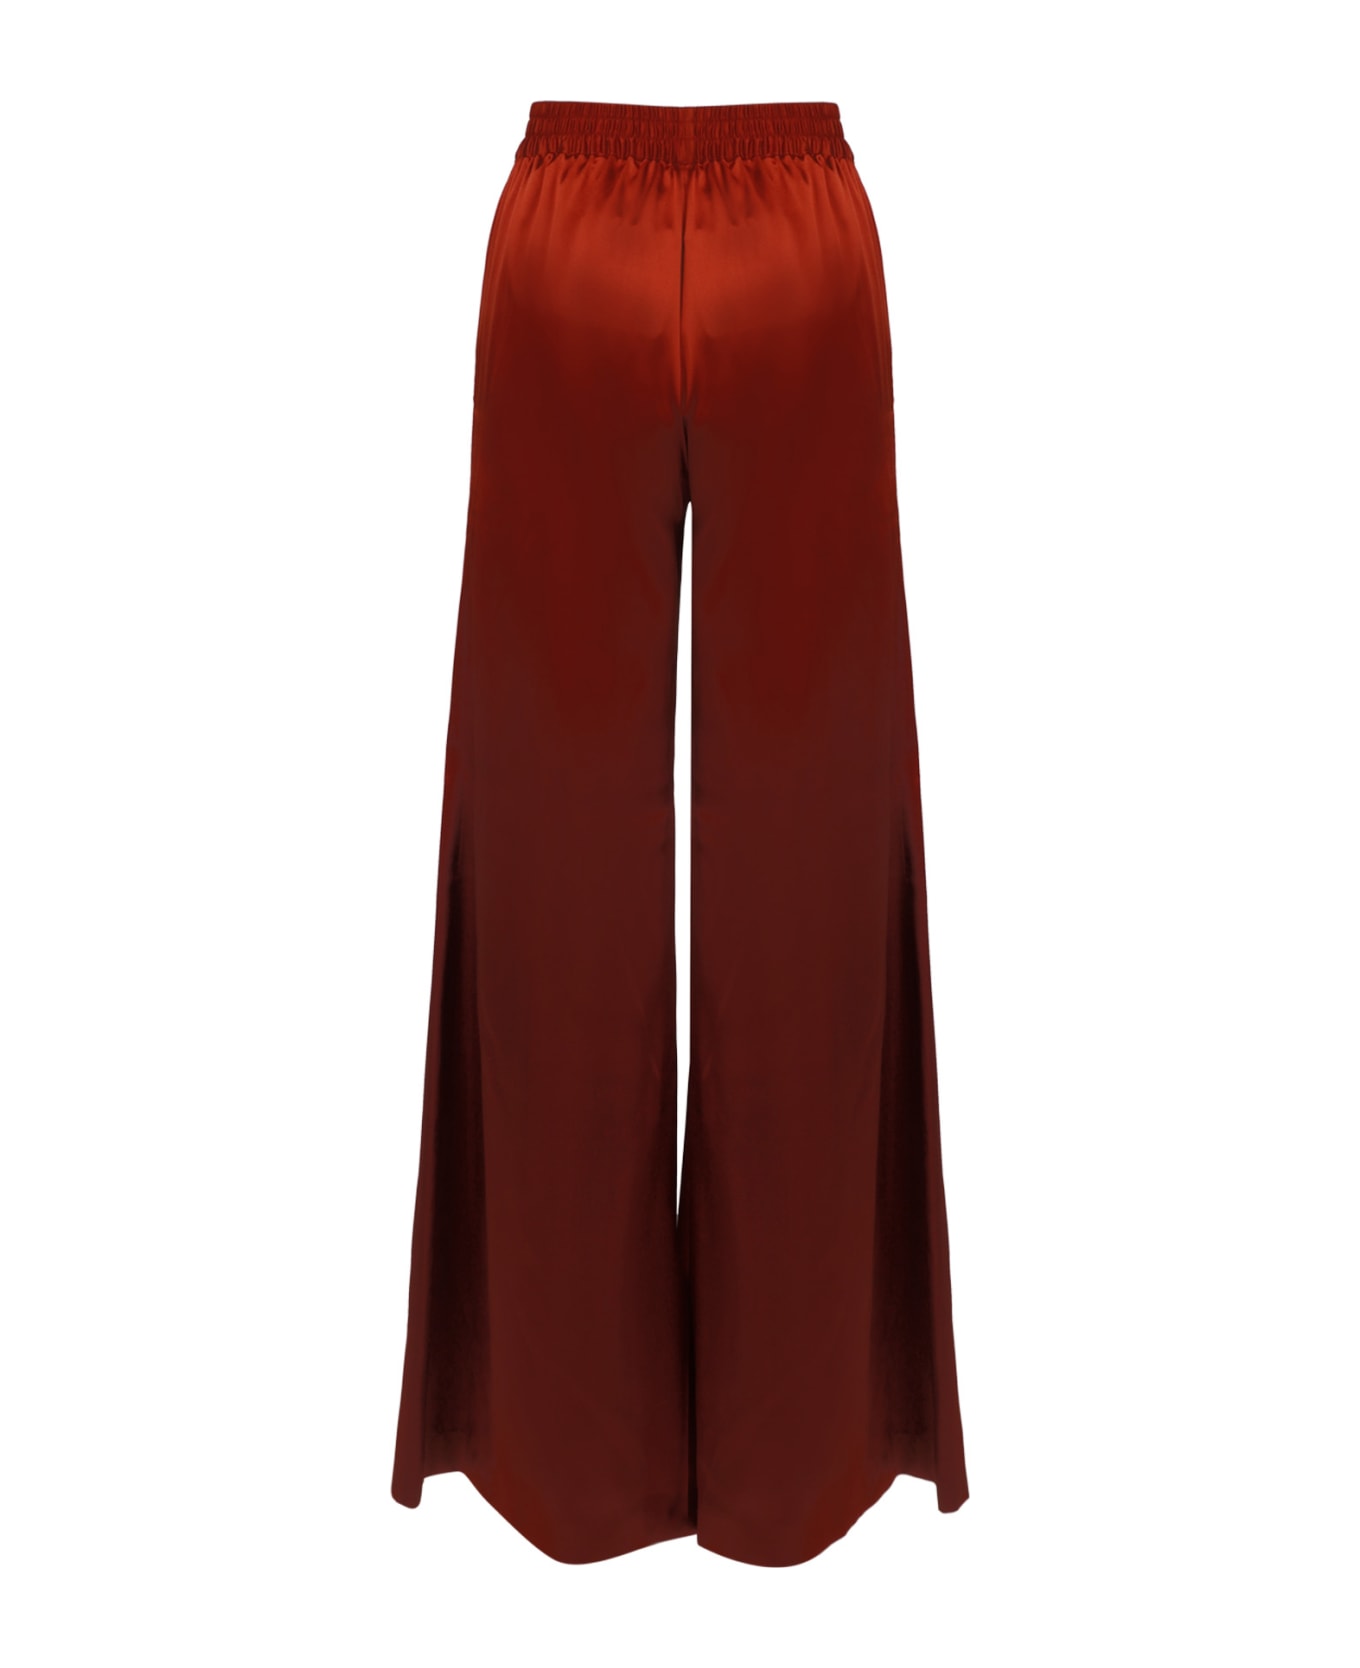 Gianluca Capannolo 'antonia' Wide Palazzo Pants - Lobster